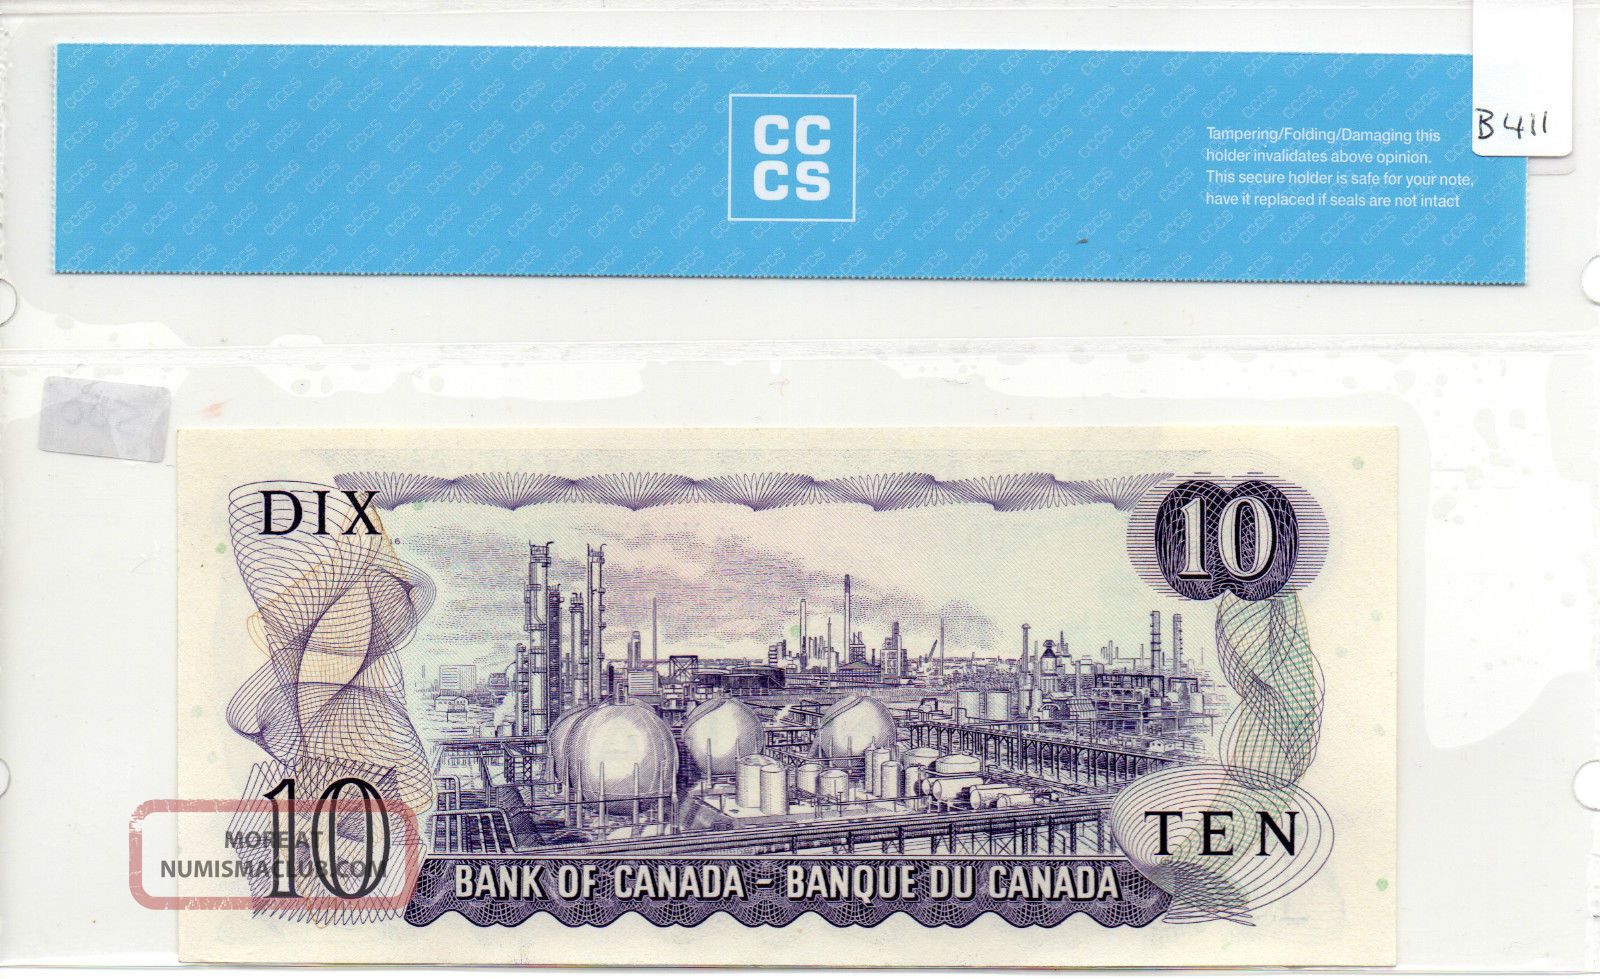 1971 Canada $10 Replacement Note Cccs Graded Unc - 64 Law - Bou Va, Bc